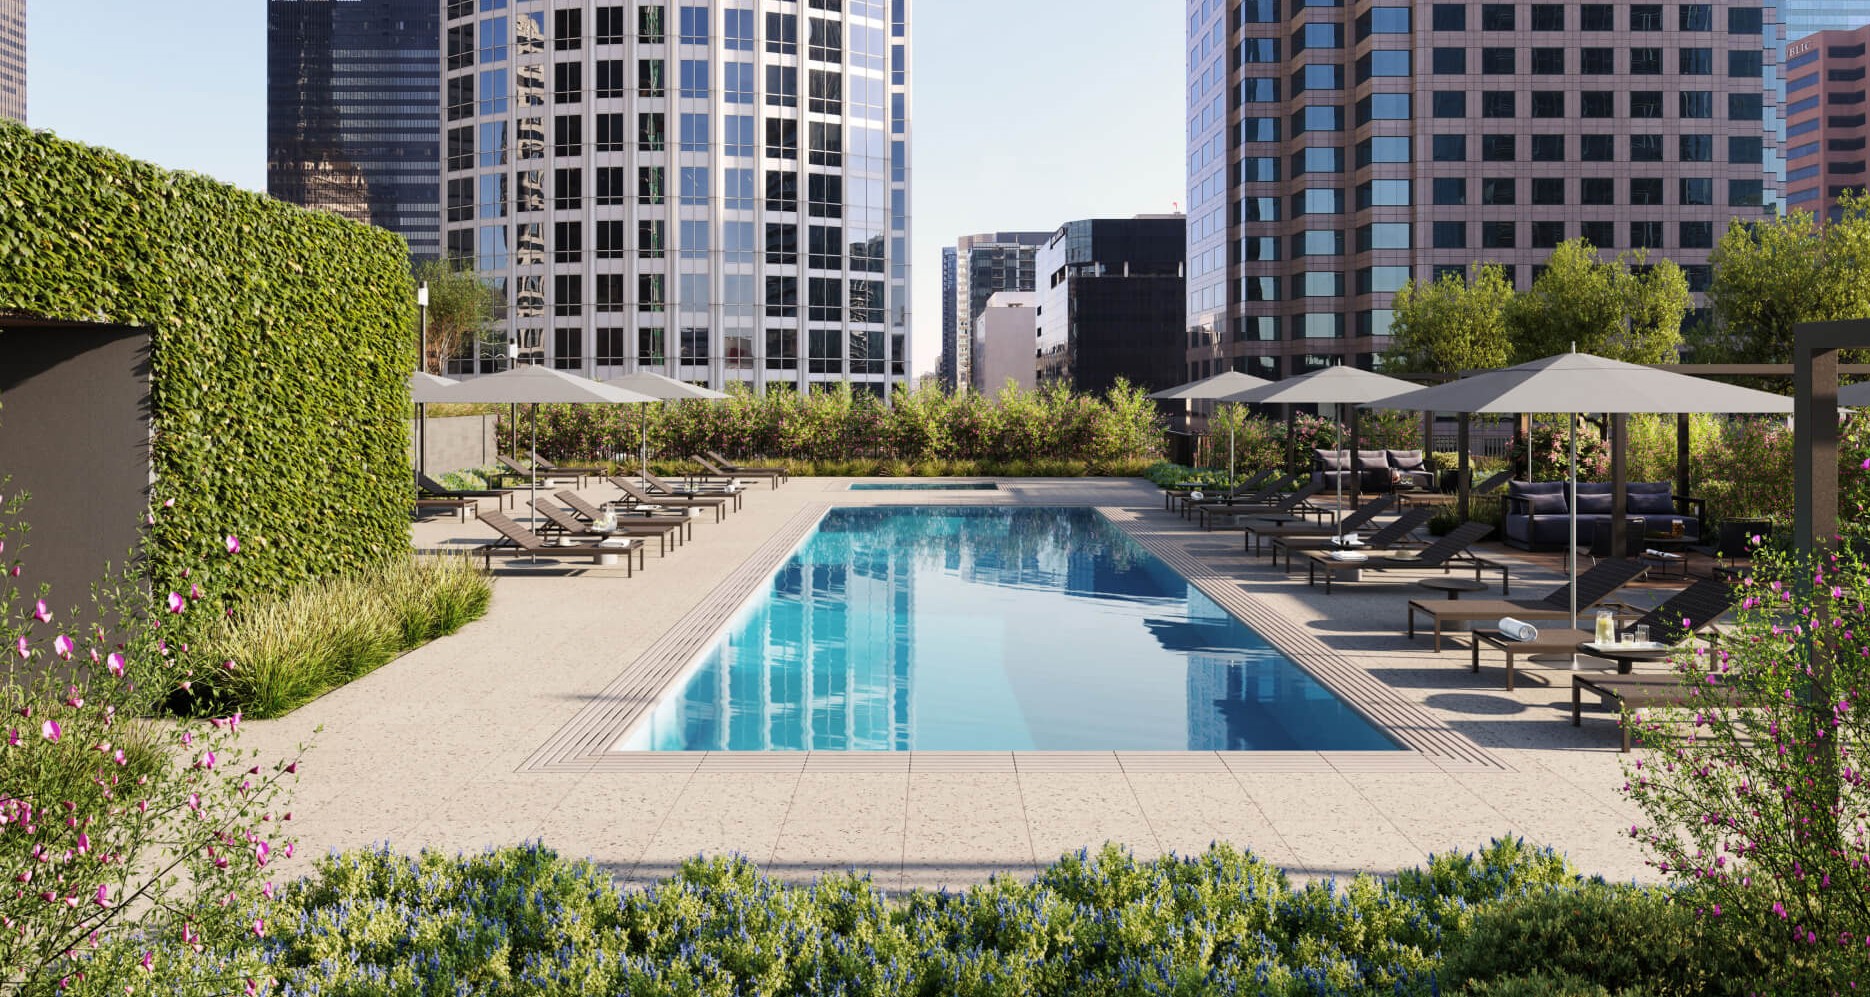 The outdoor lap pool and whirlpool with seating and semiprivate cabanas offers a spa-like experience for residents and their guests.